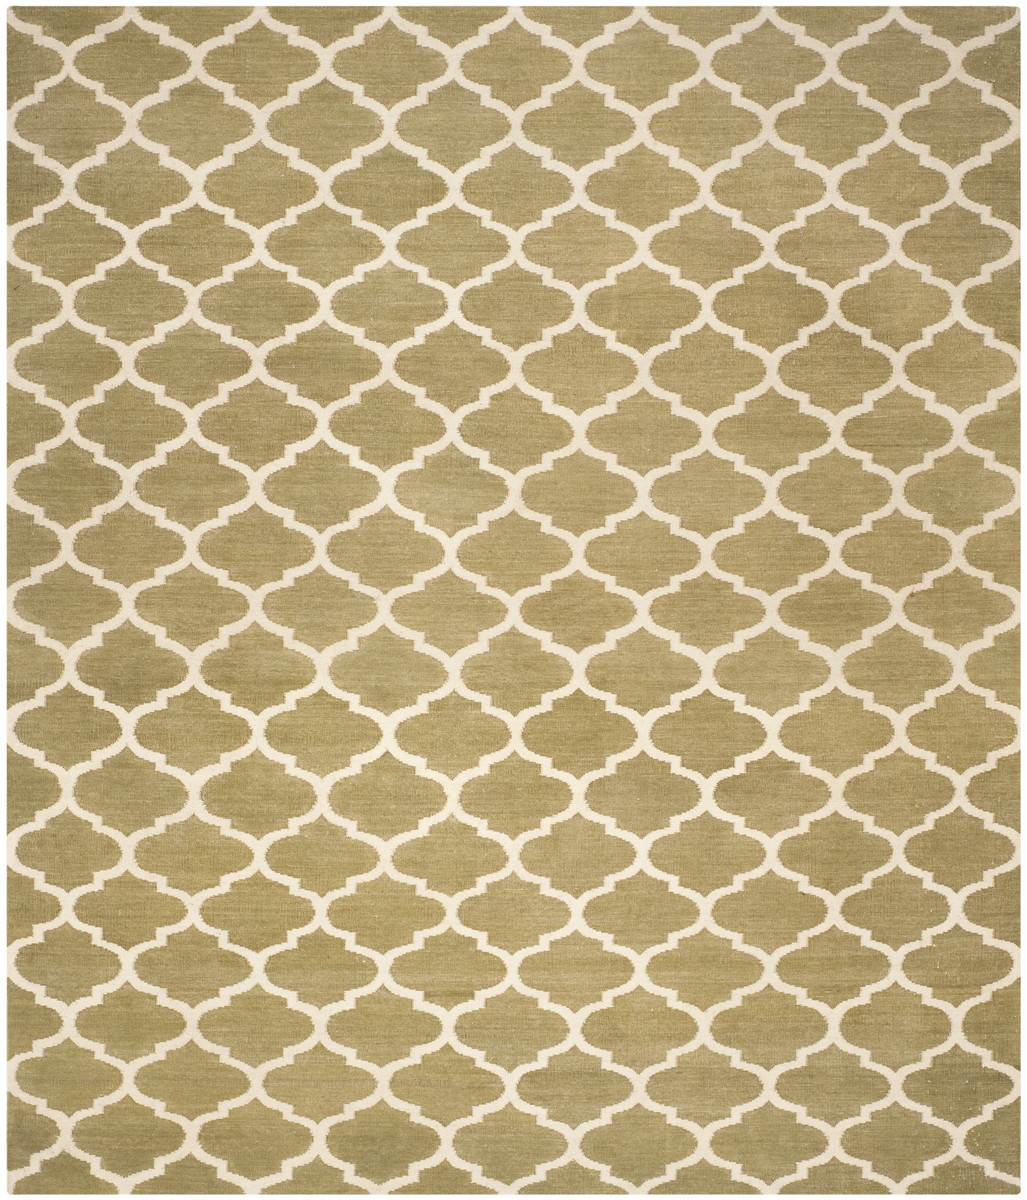 DHU115A-8 Dhurries Hand Woven Flat Weave Rectangle Rug, Green & Ivory - 8 x 10 ft -  Safavieh